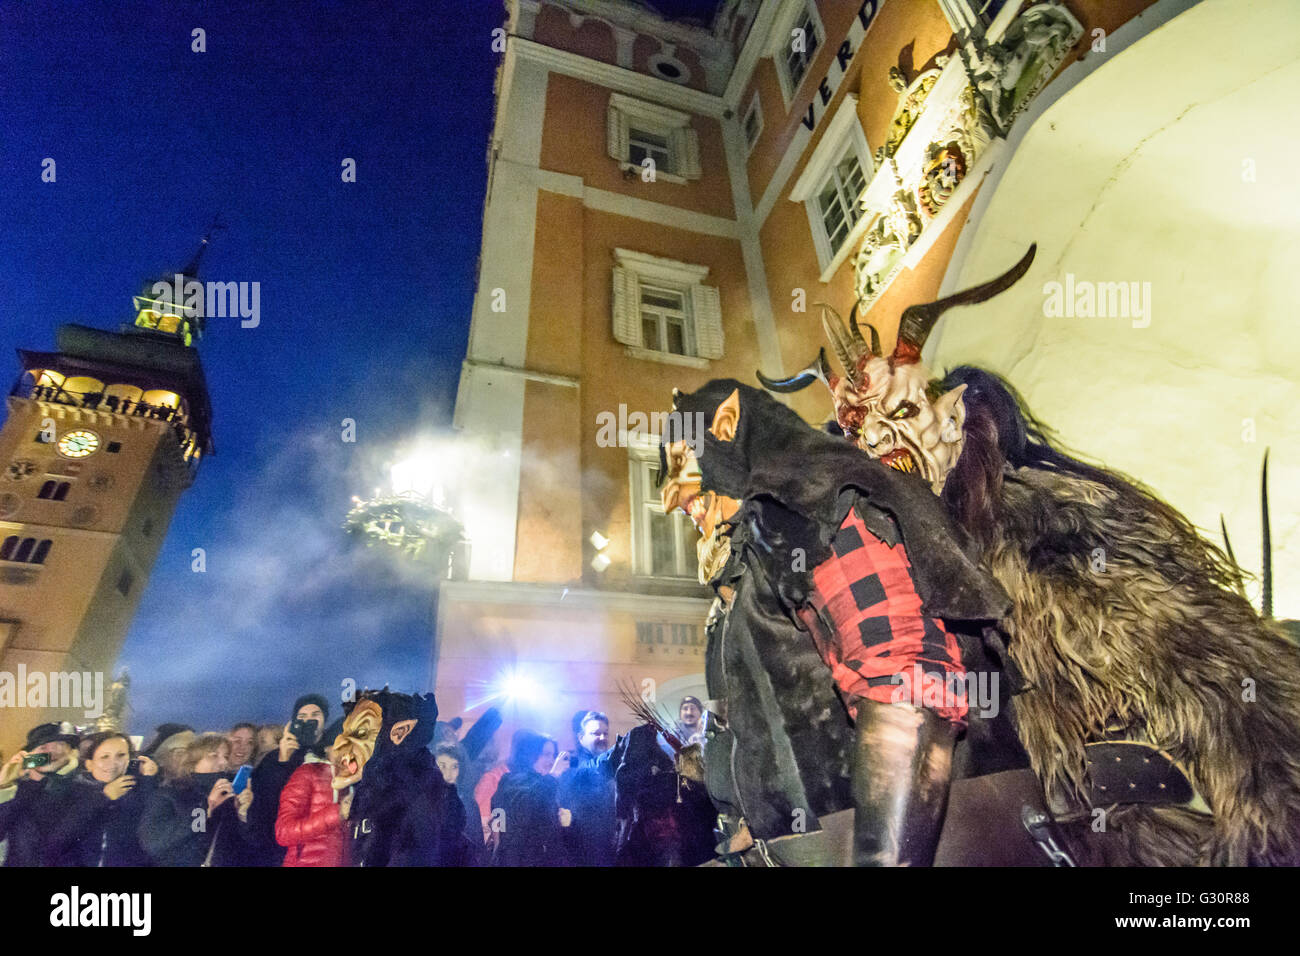 Perchtenlauf (mask procession) with Krampus in the main square in front of City Hall and Verderberhaus, Austria, Niederösterreic Stock Photo